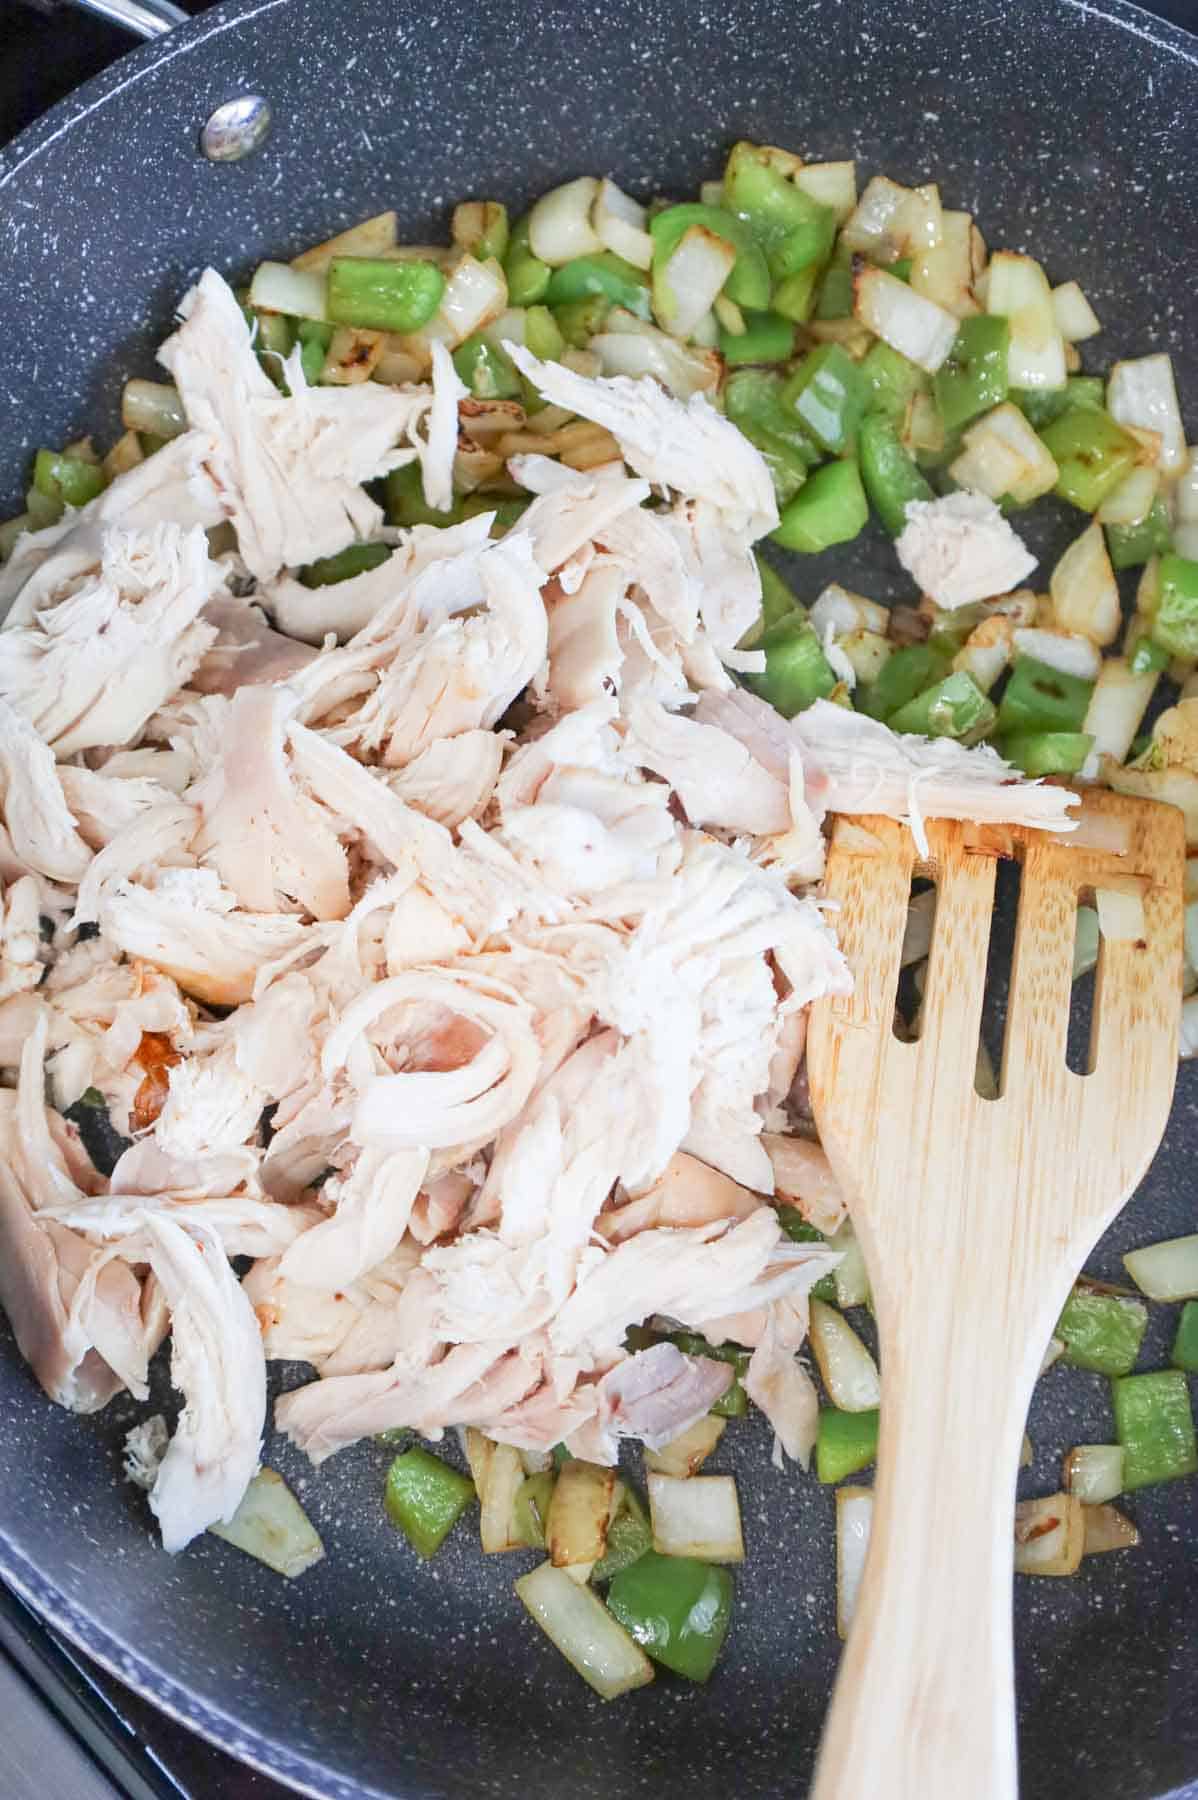 shredded chicken, diced green peppers and diced onions in a skillet